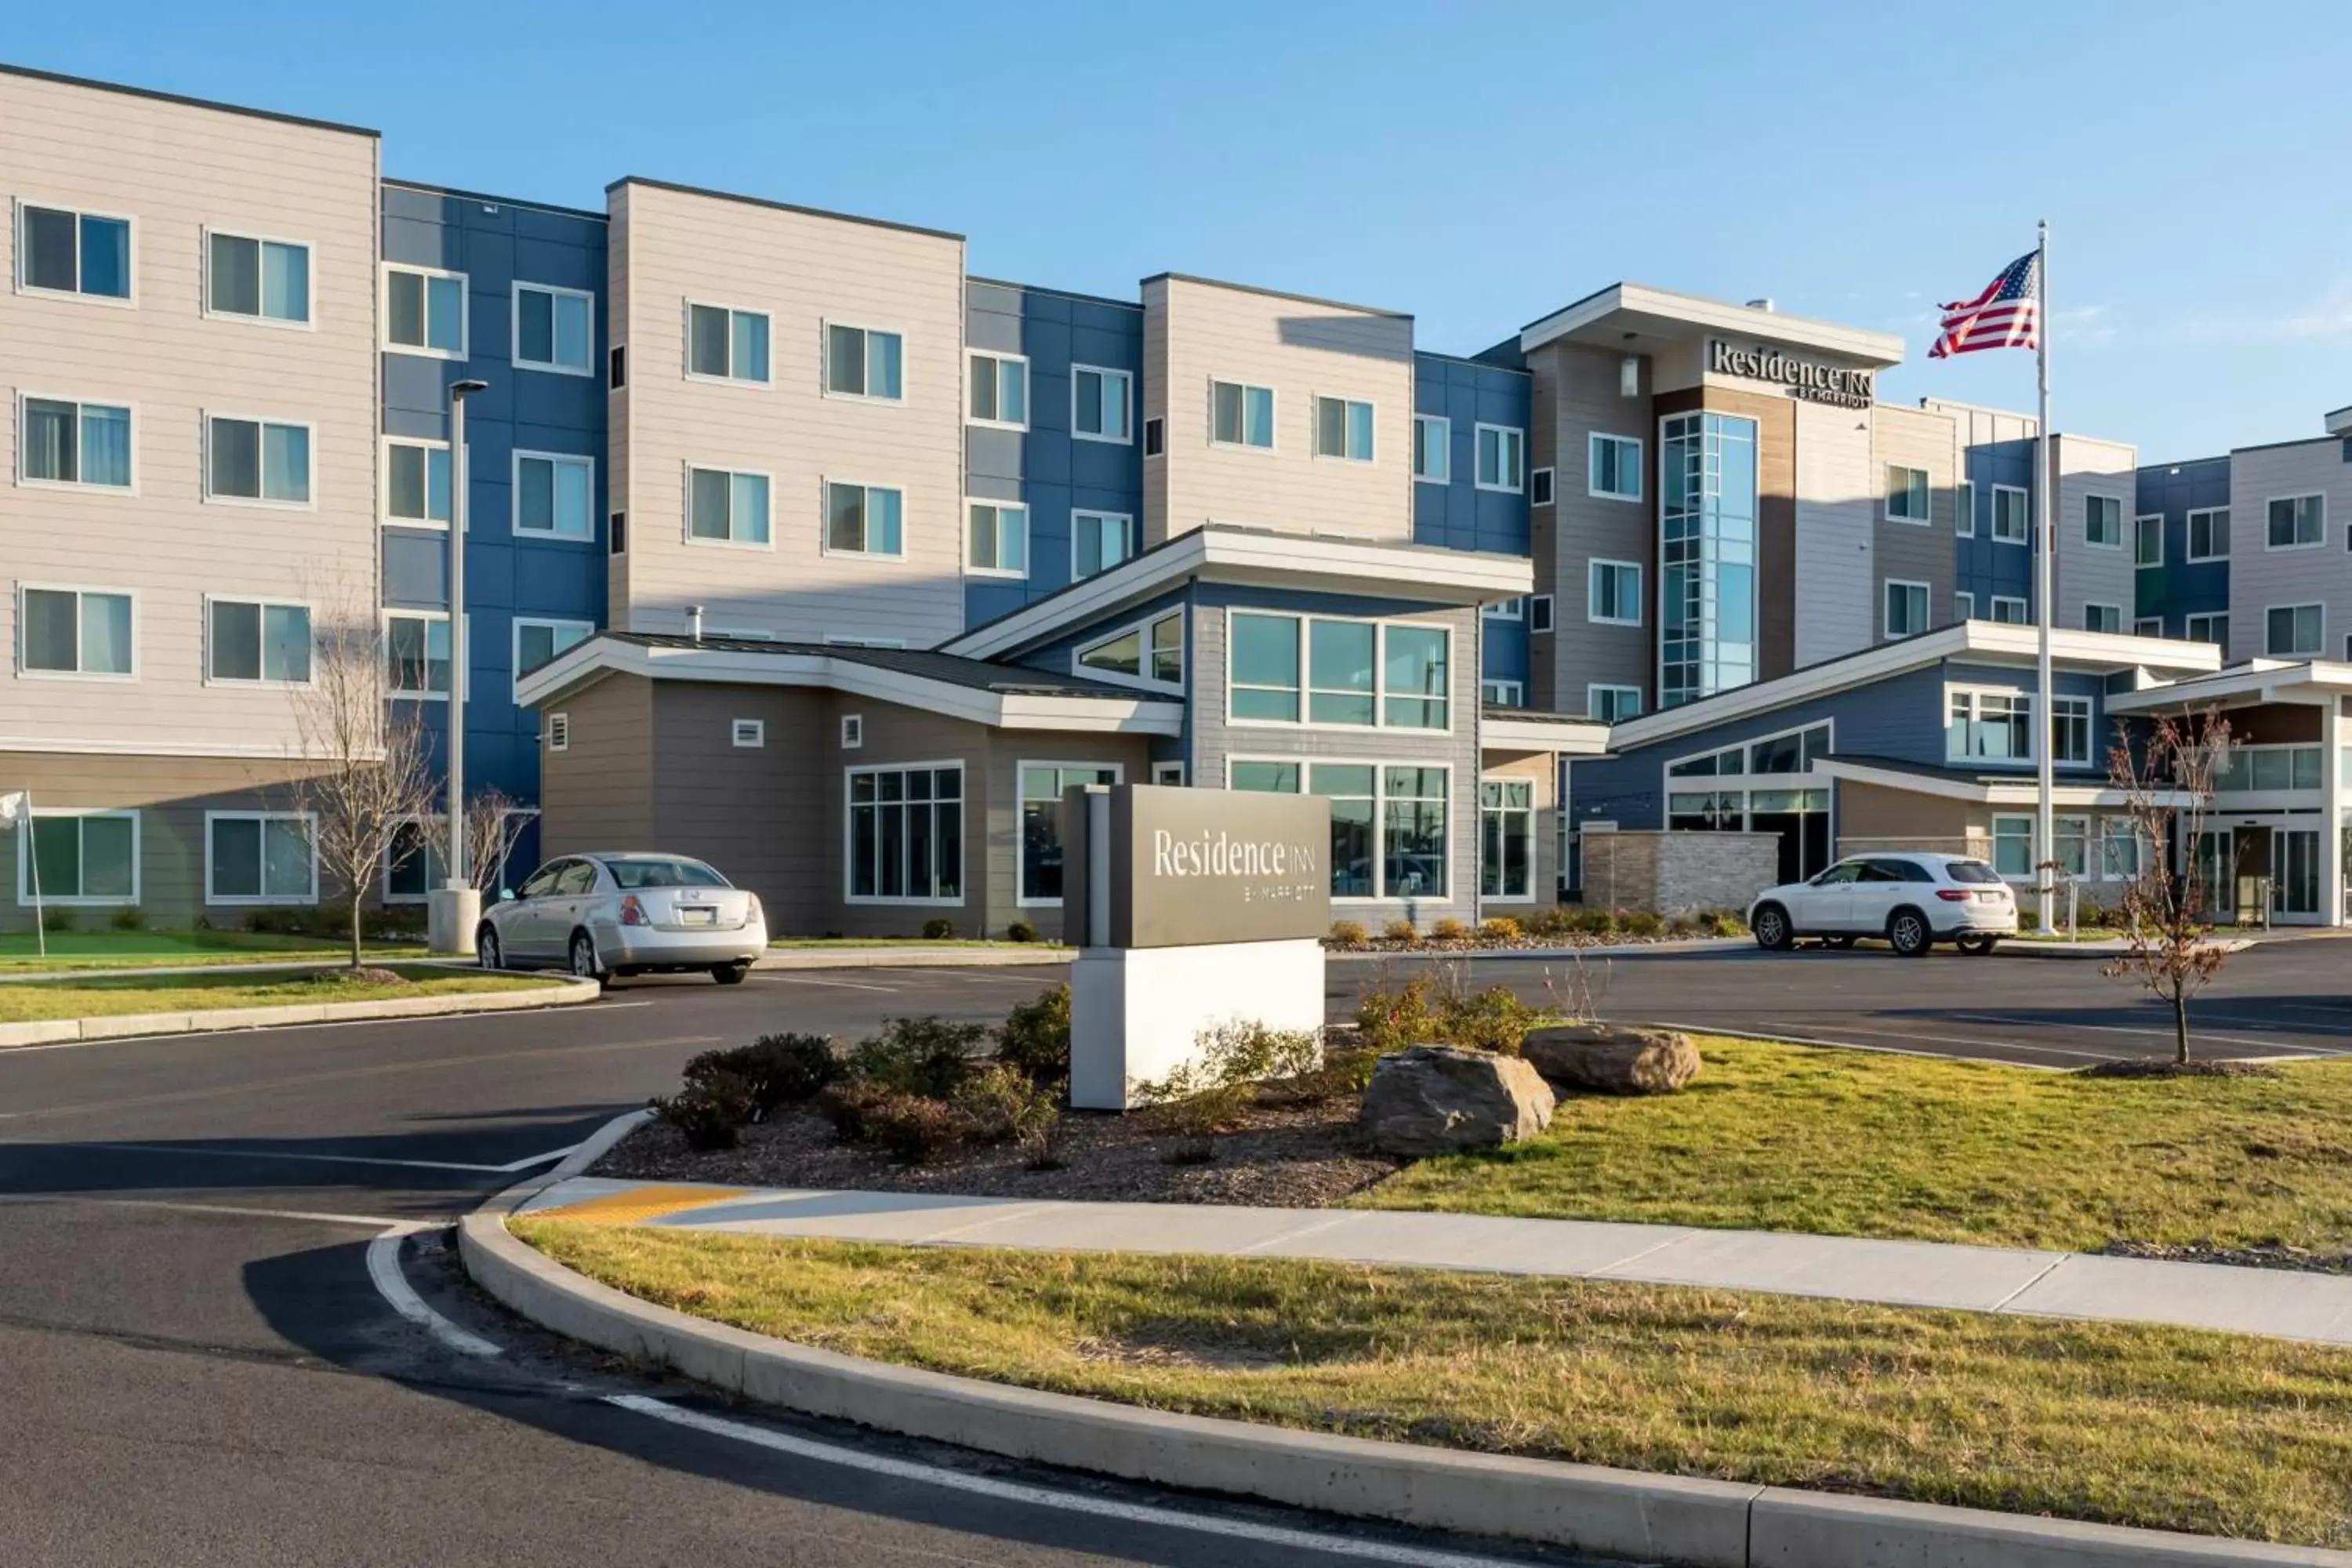 Property Building in Residence Inn by Marriott Wilkes-Barre Arena